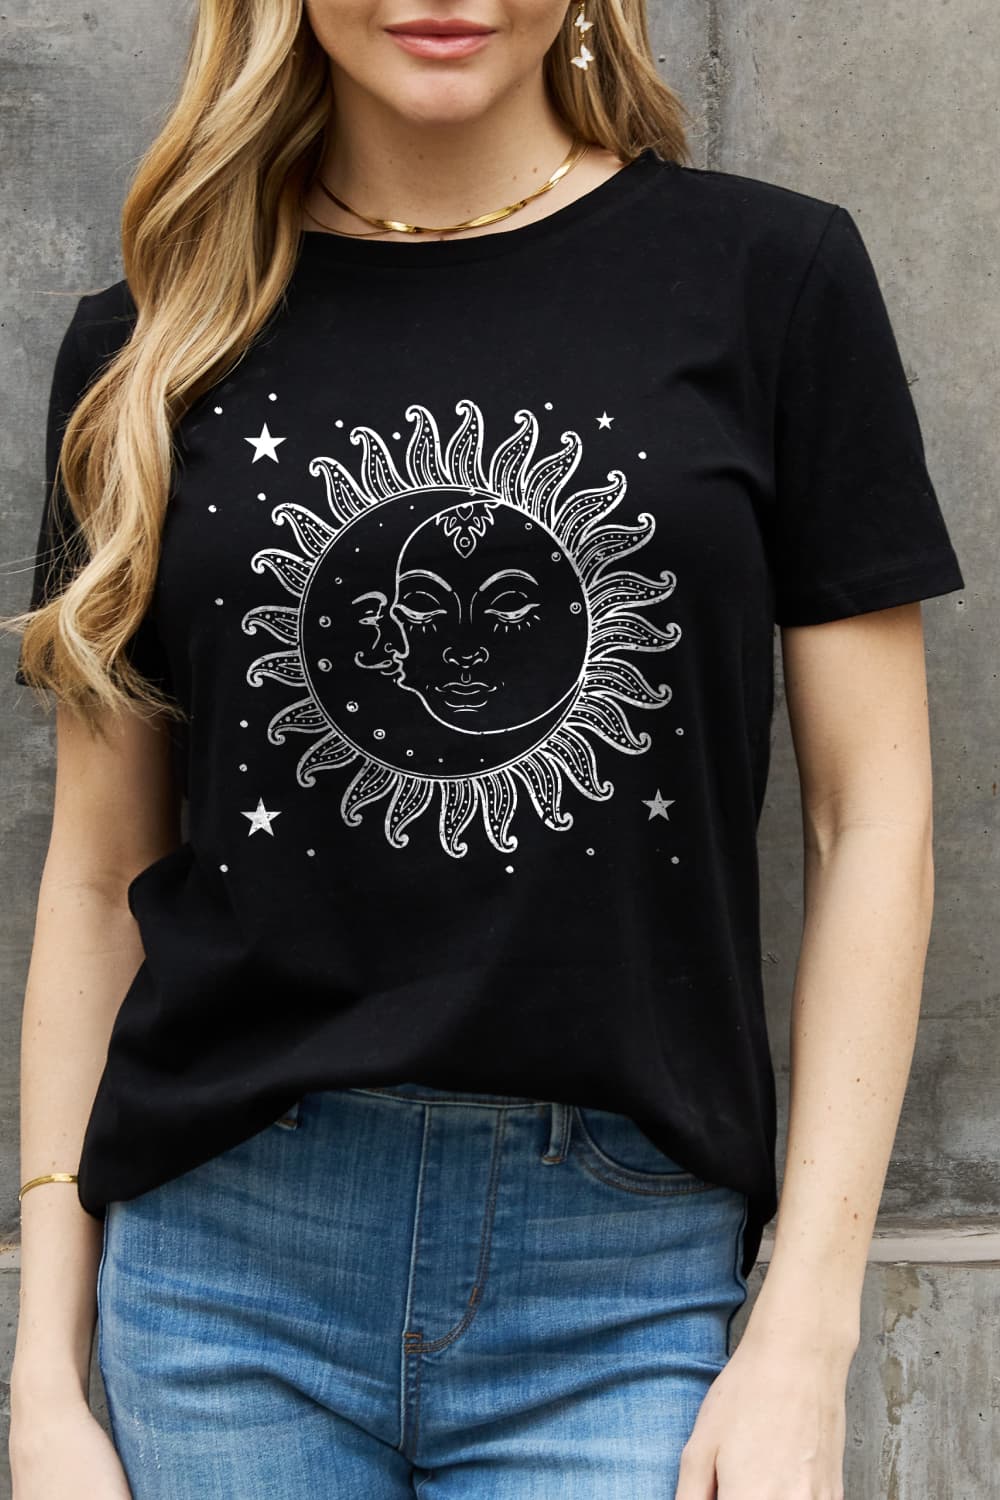 Simply Love Sun and Star Graphic Cotton Tee-TOPS / DRESSES-[Adult]-[Female]-Black-S-2022 Online Blue Zone Planet